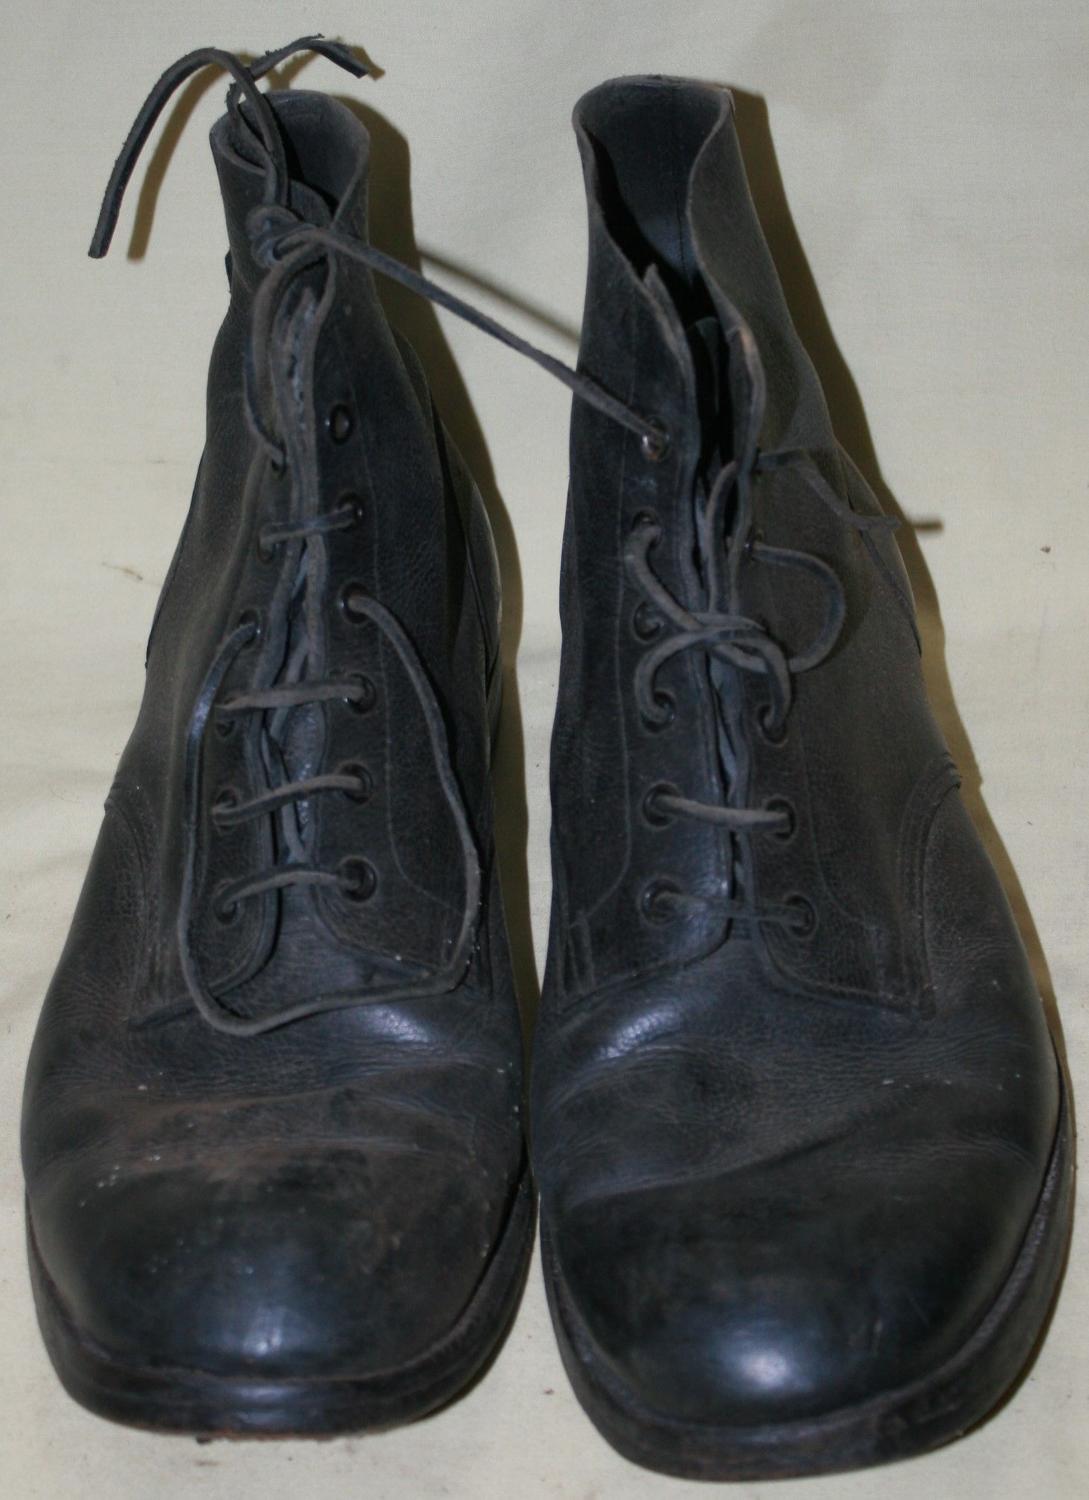 A PAIR OF 1944 DATED NAVY ISSUE BOOTS SIZE 11